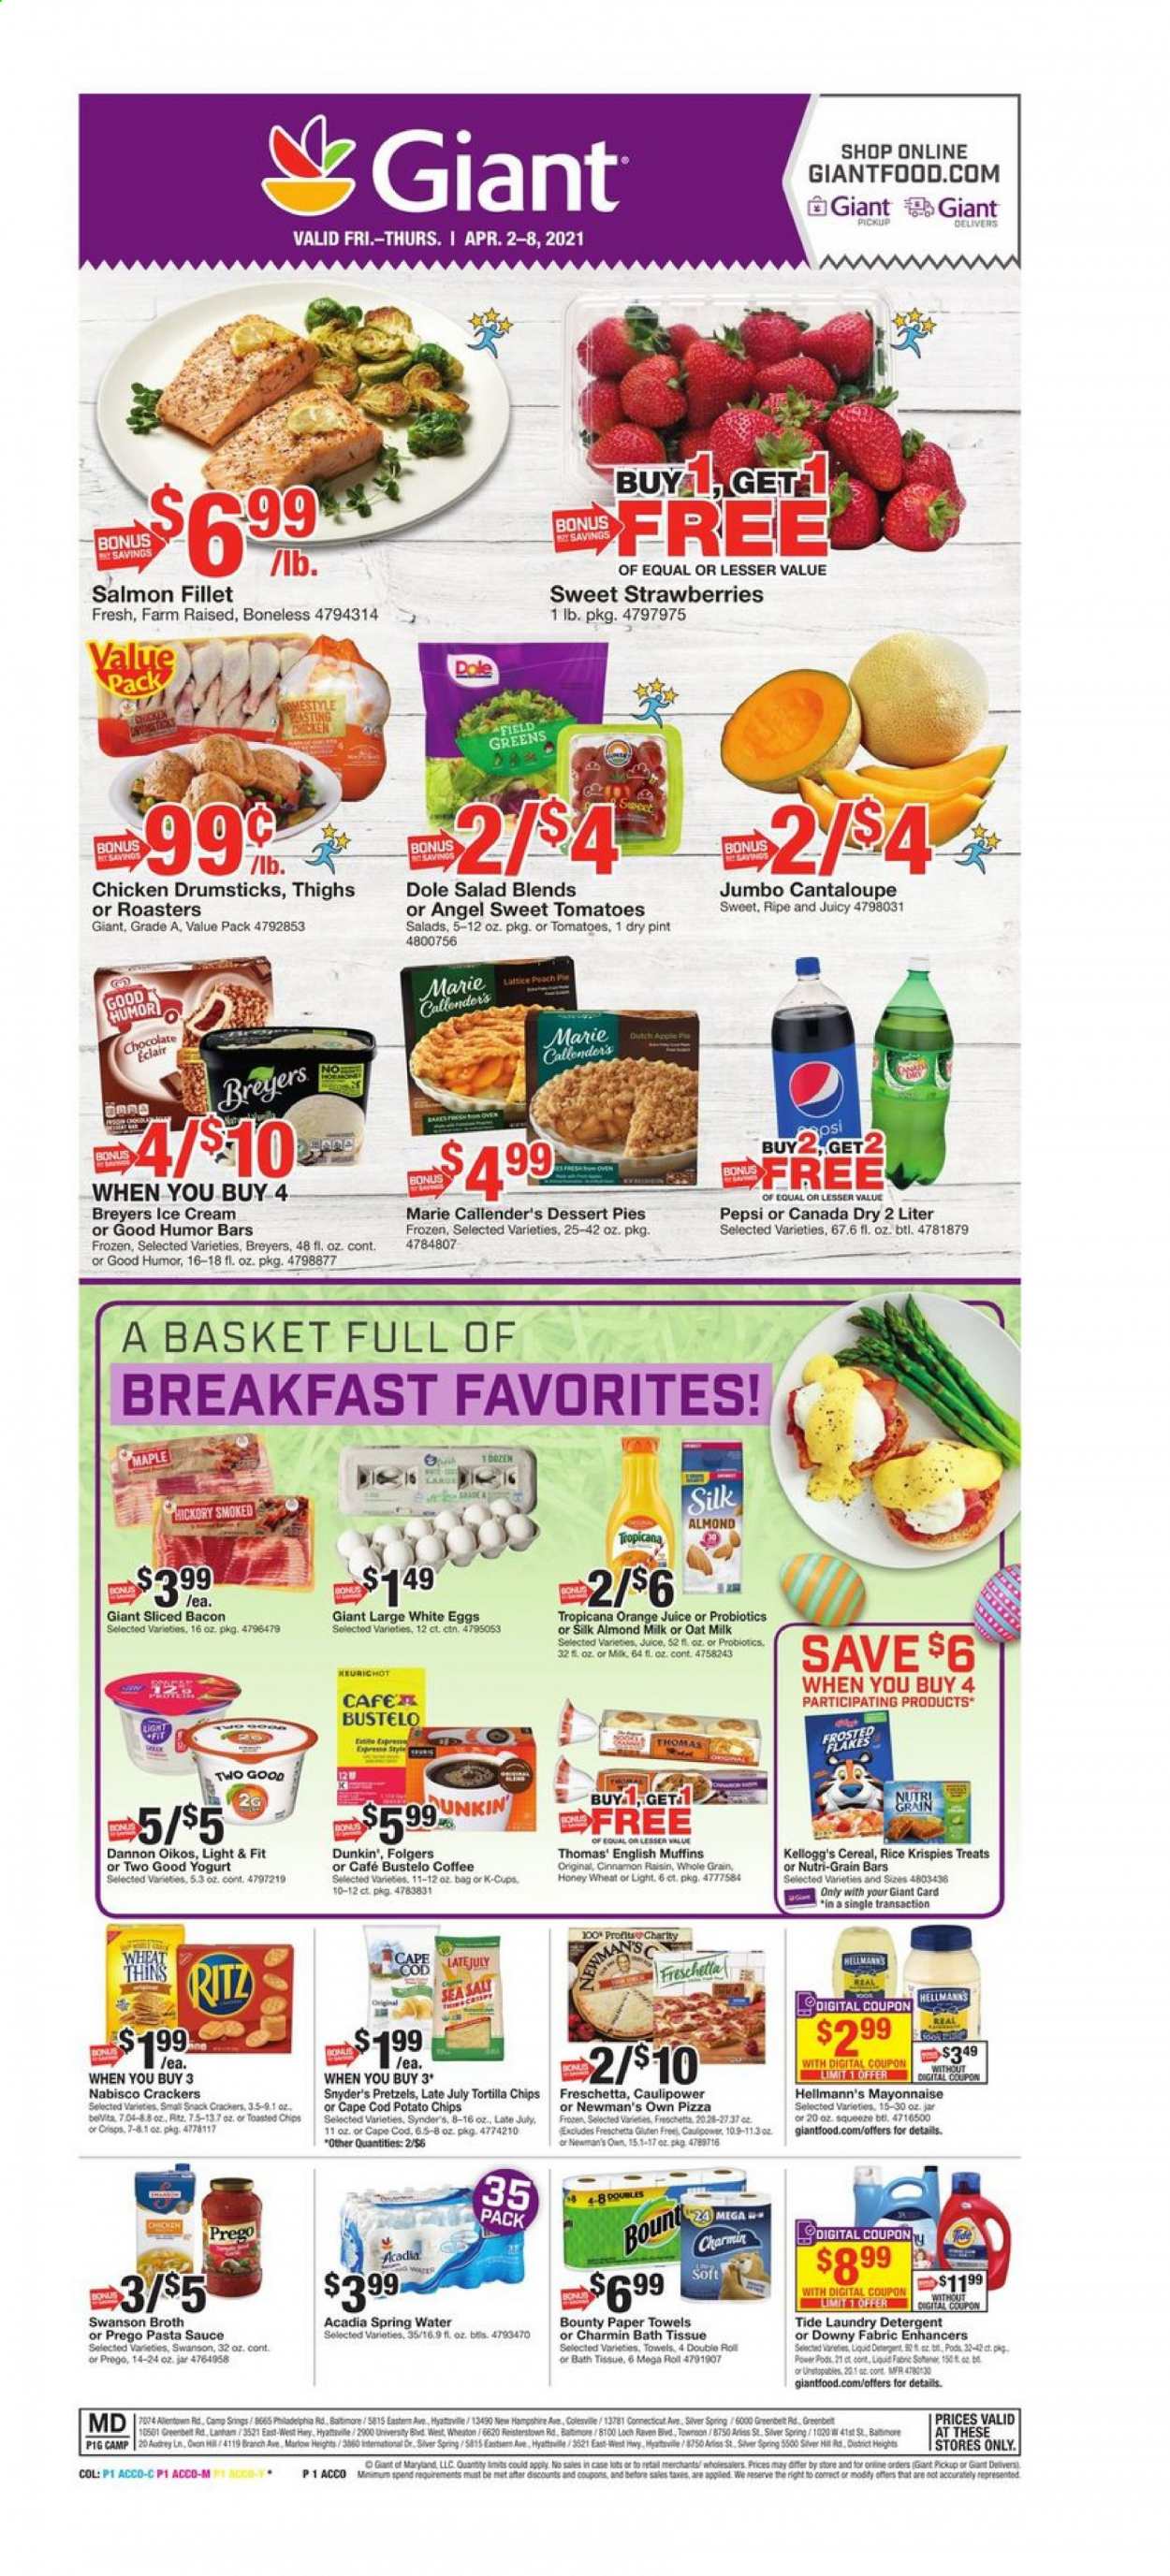 thumbnail - Giant Food Flyer - 04/02/2021 - 04/08/2021 - Sales products - Dole, pretzels, muffin, tomatoes, cod, salmon, salmon fillet, english muffins, pizza, salad, sauce, Marie Callender's, bacon, Philadelphia, yoghurt, Oikos, Dannon, almond milk, oat milk, eggs, mayonnaise, Hellmann’s, ice cream, strawberries, cantaloupe, chocolate, Bounty, crackers, Kellogg's, Nutri-Grain bars, RITZ, tortilla chips, potato chips, snack, Thins, sea salt, broth, cereals, Rice Krispies, Frosted Flakes, belVita, Nutri-Grain, pasta sauce, raisins, Canada Dry, Pepsi, orange juice, juice, spring water, Acadia, coffee, Folgers, coffee capsules, K-Cups, chicken drumsticks, bath tissue, kitchen towels, paper towels, Charmin, detergent, Tide, Unstopables, laundry detergent, liquid detergent, basket, probiotics. Page 1.